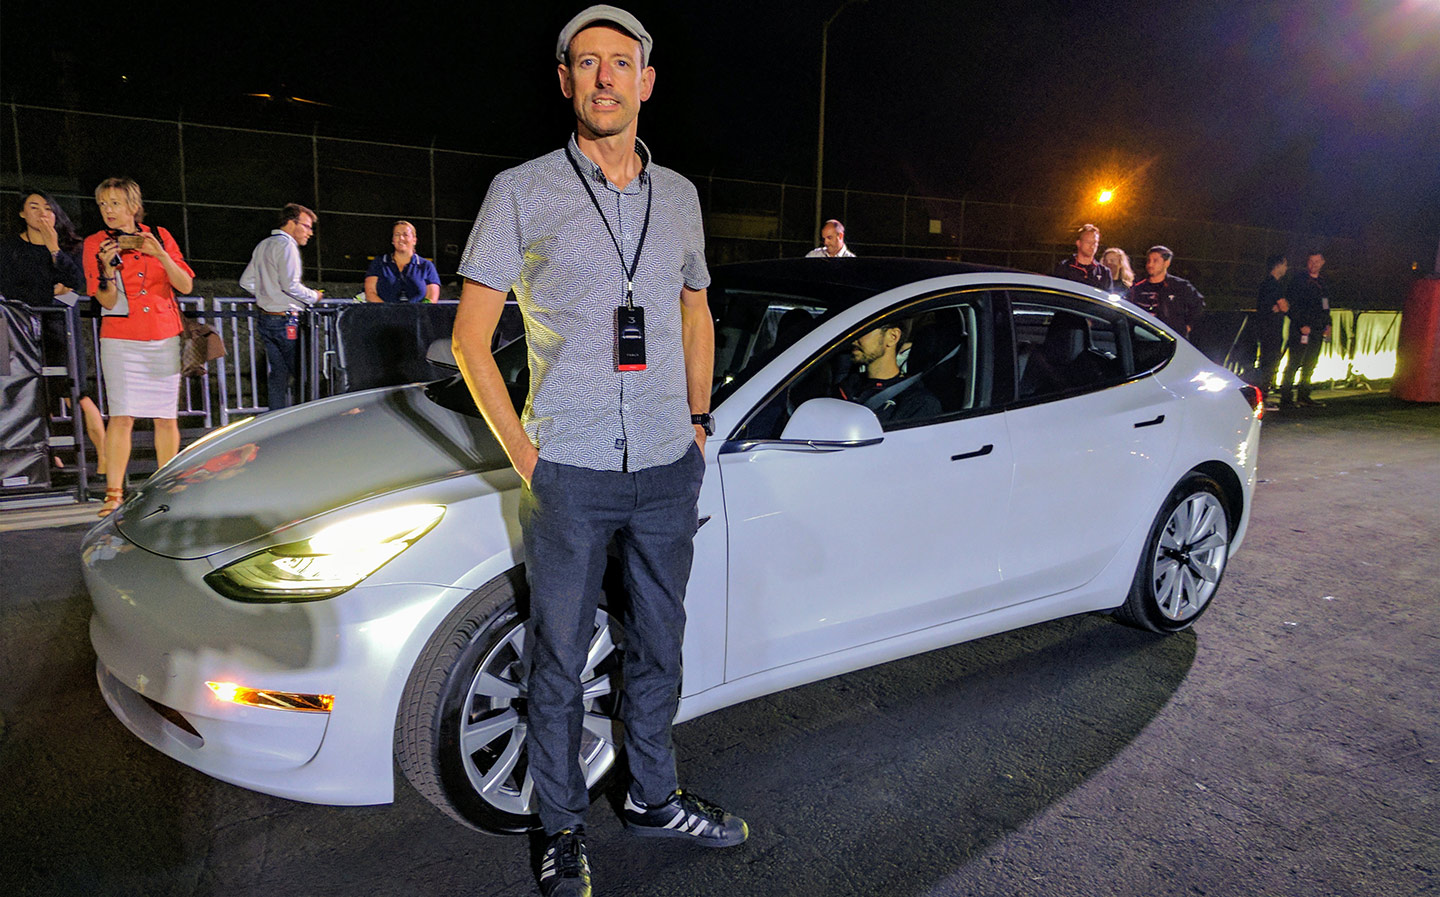 Mark Harris behind the scenes at the Tesla Model 3 launch